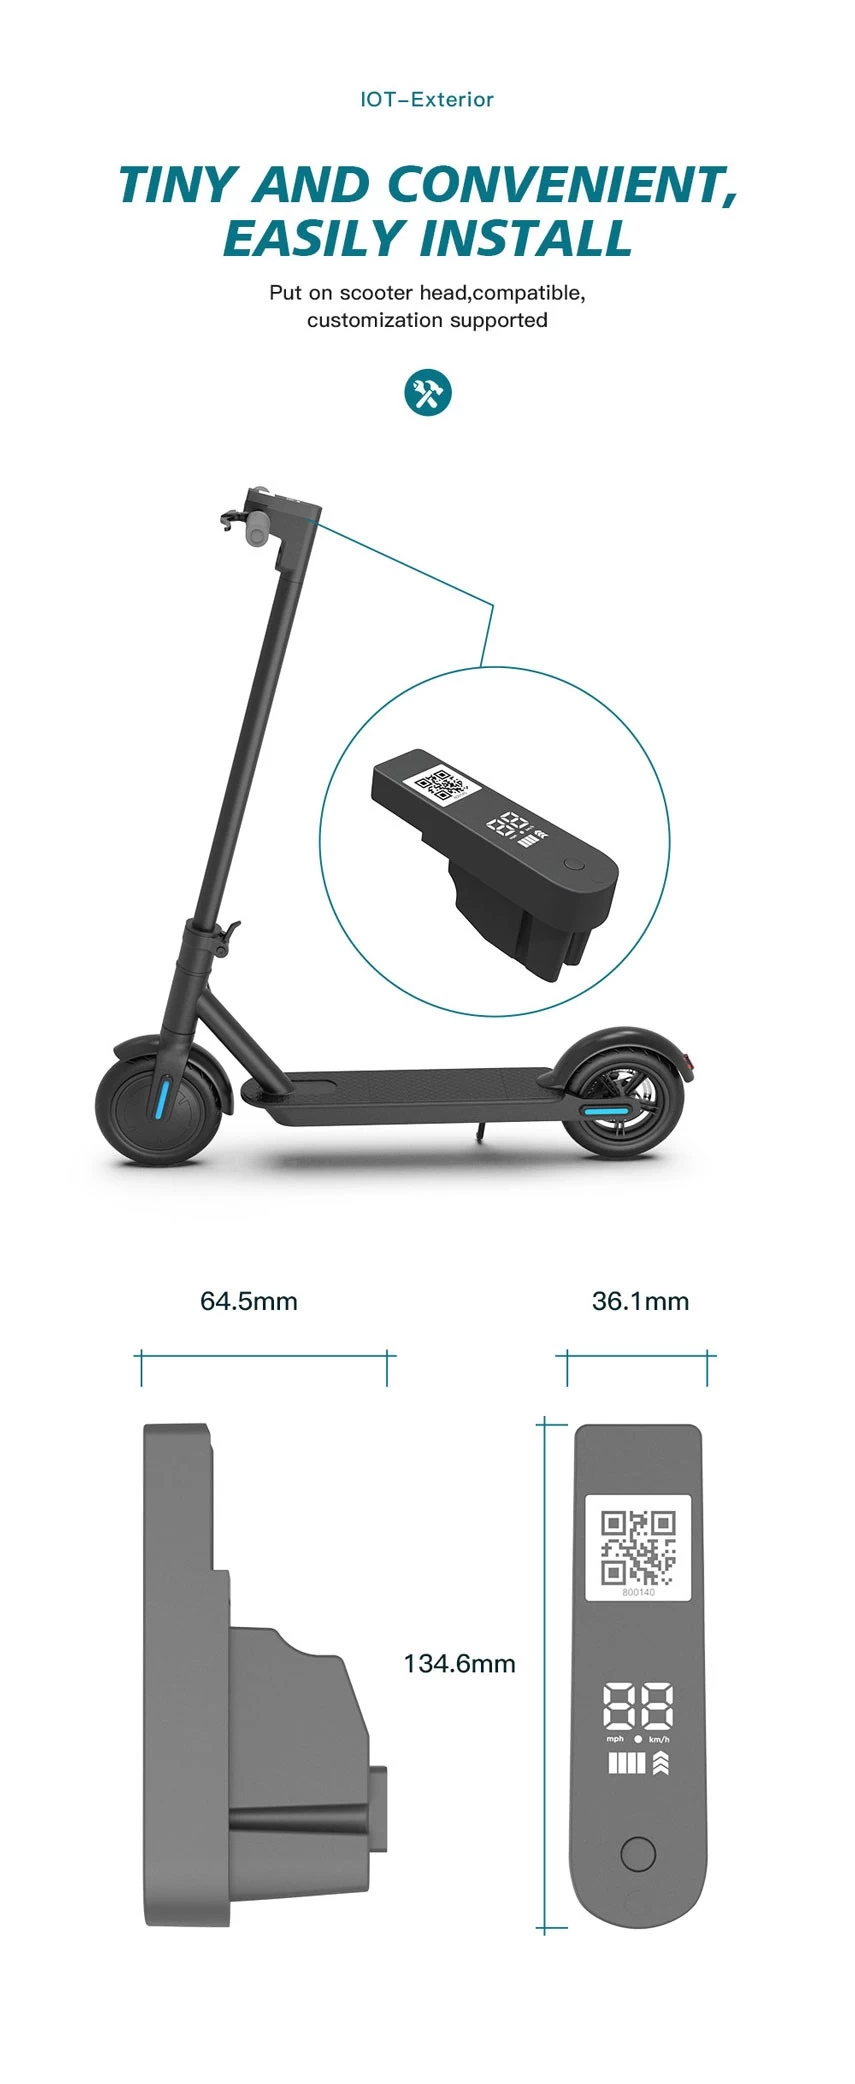 electric scooter lock with alarm